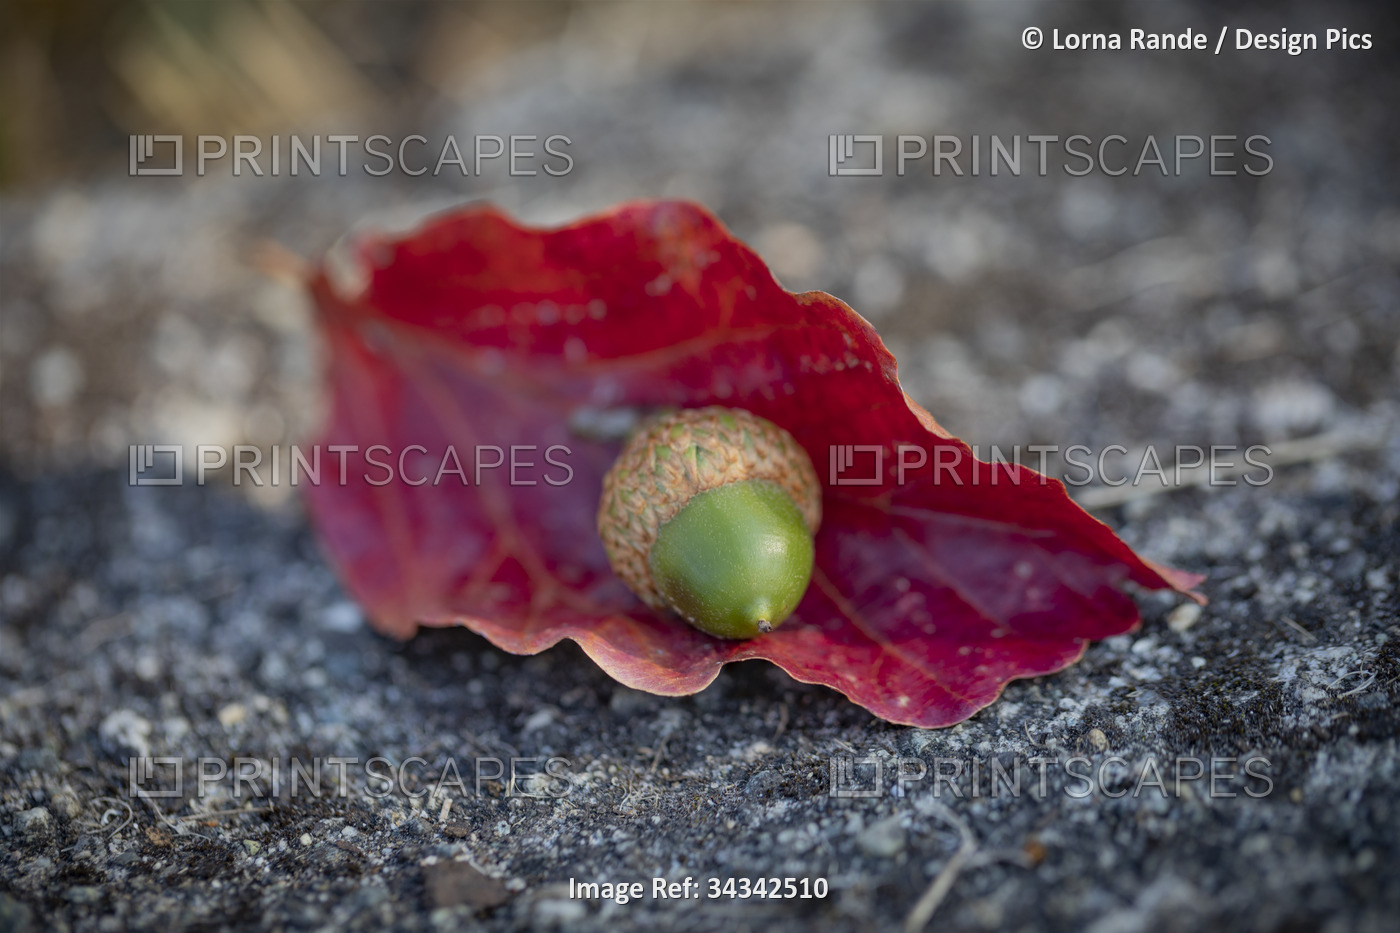 Acorn nestled in a curled red leaf; North Vancouver, British Columbia, Canada